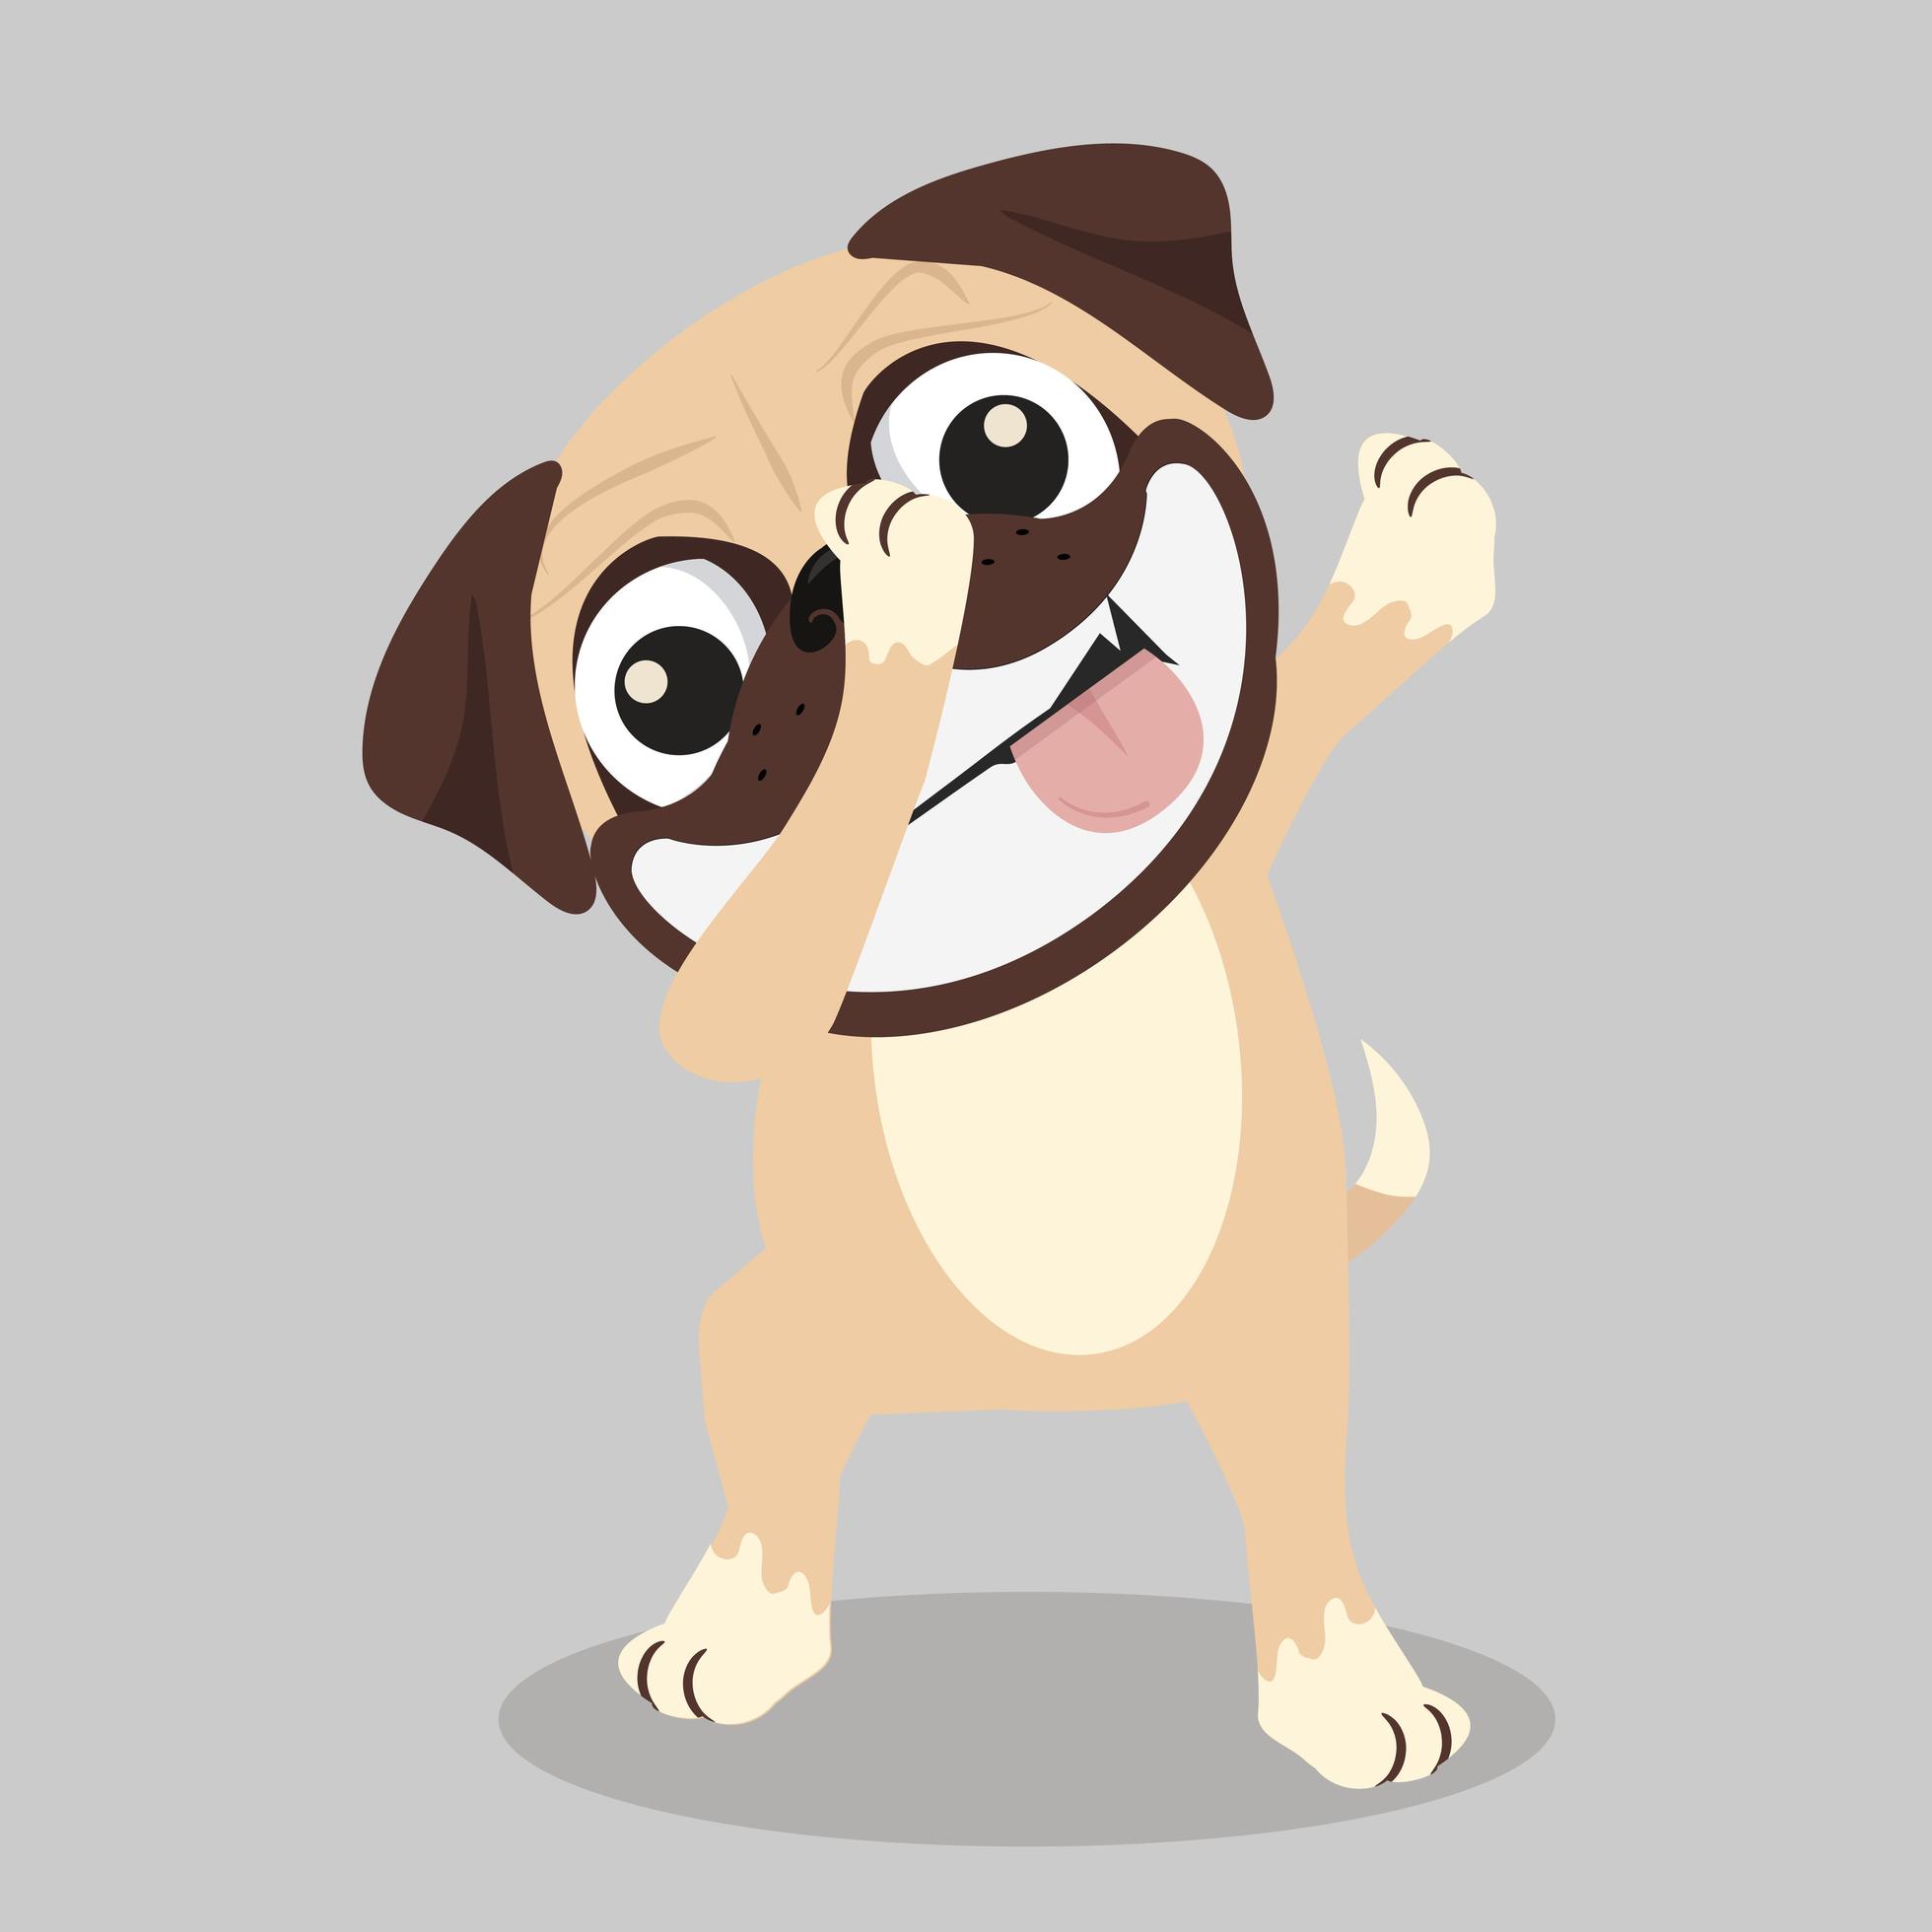 Cute puppy doing a dabbing gesture vector